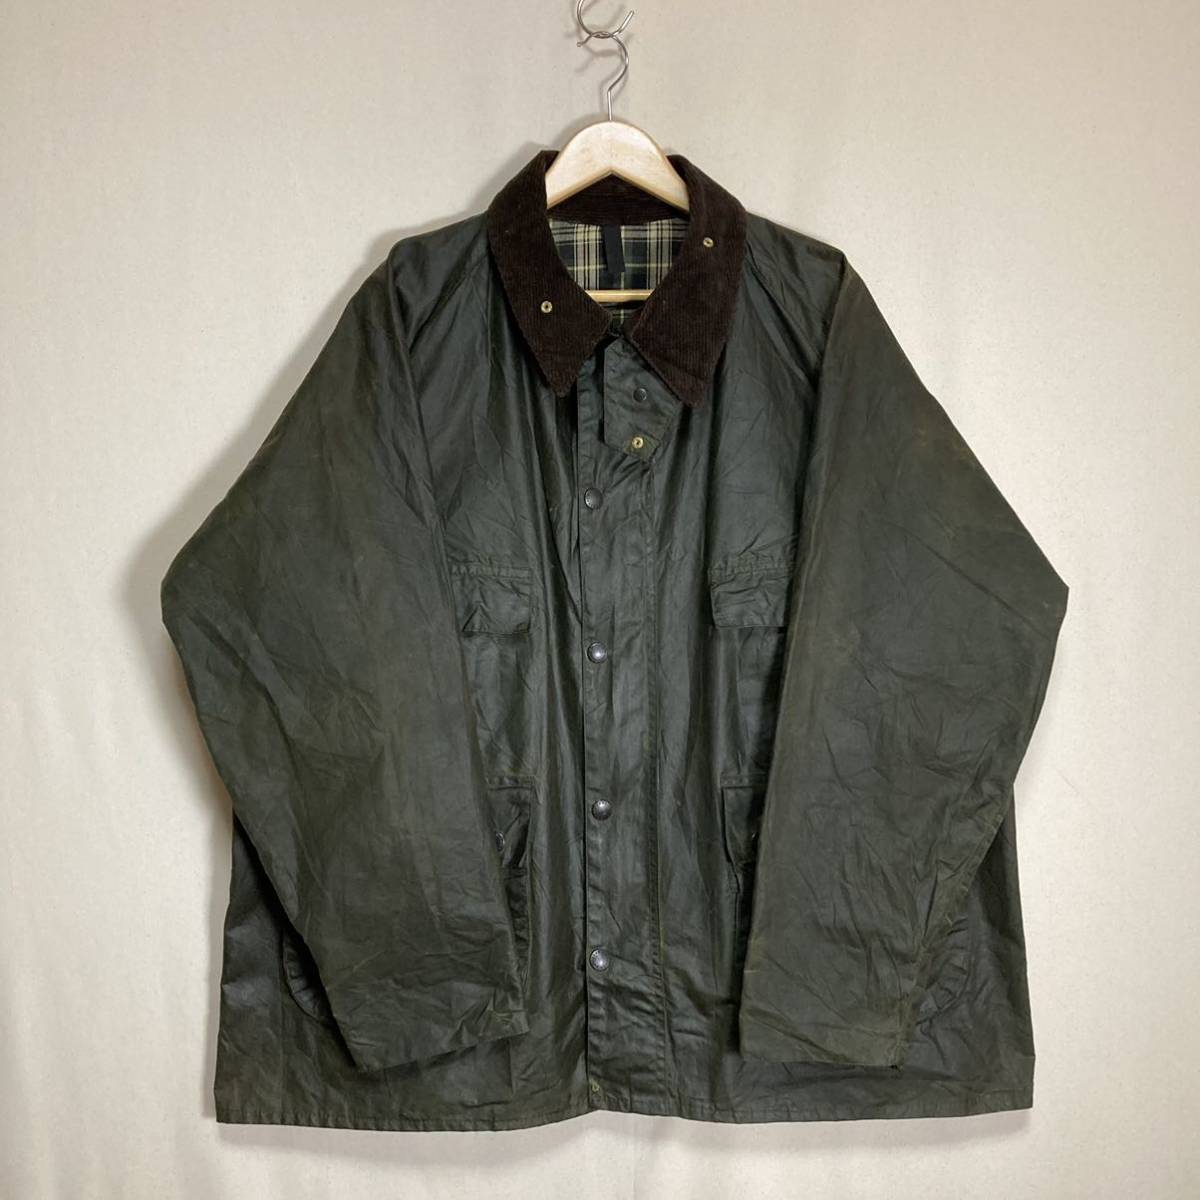 Mintcondition 1984 80s c36 Barbour BORDER バブアー ボーダー 